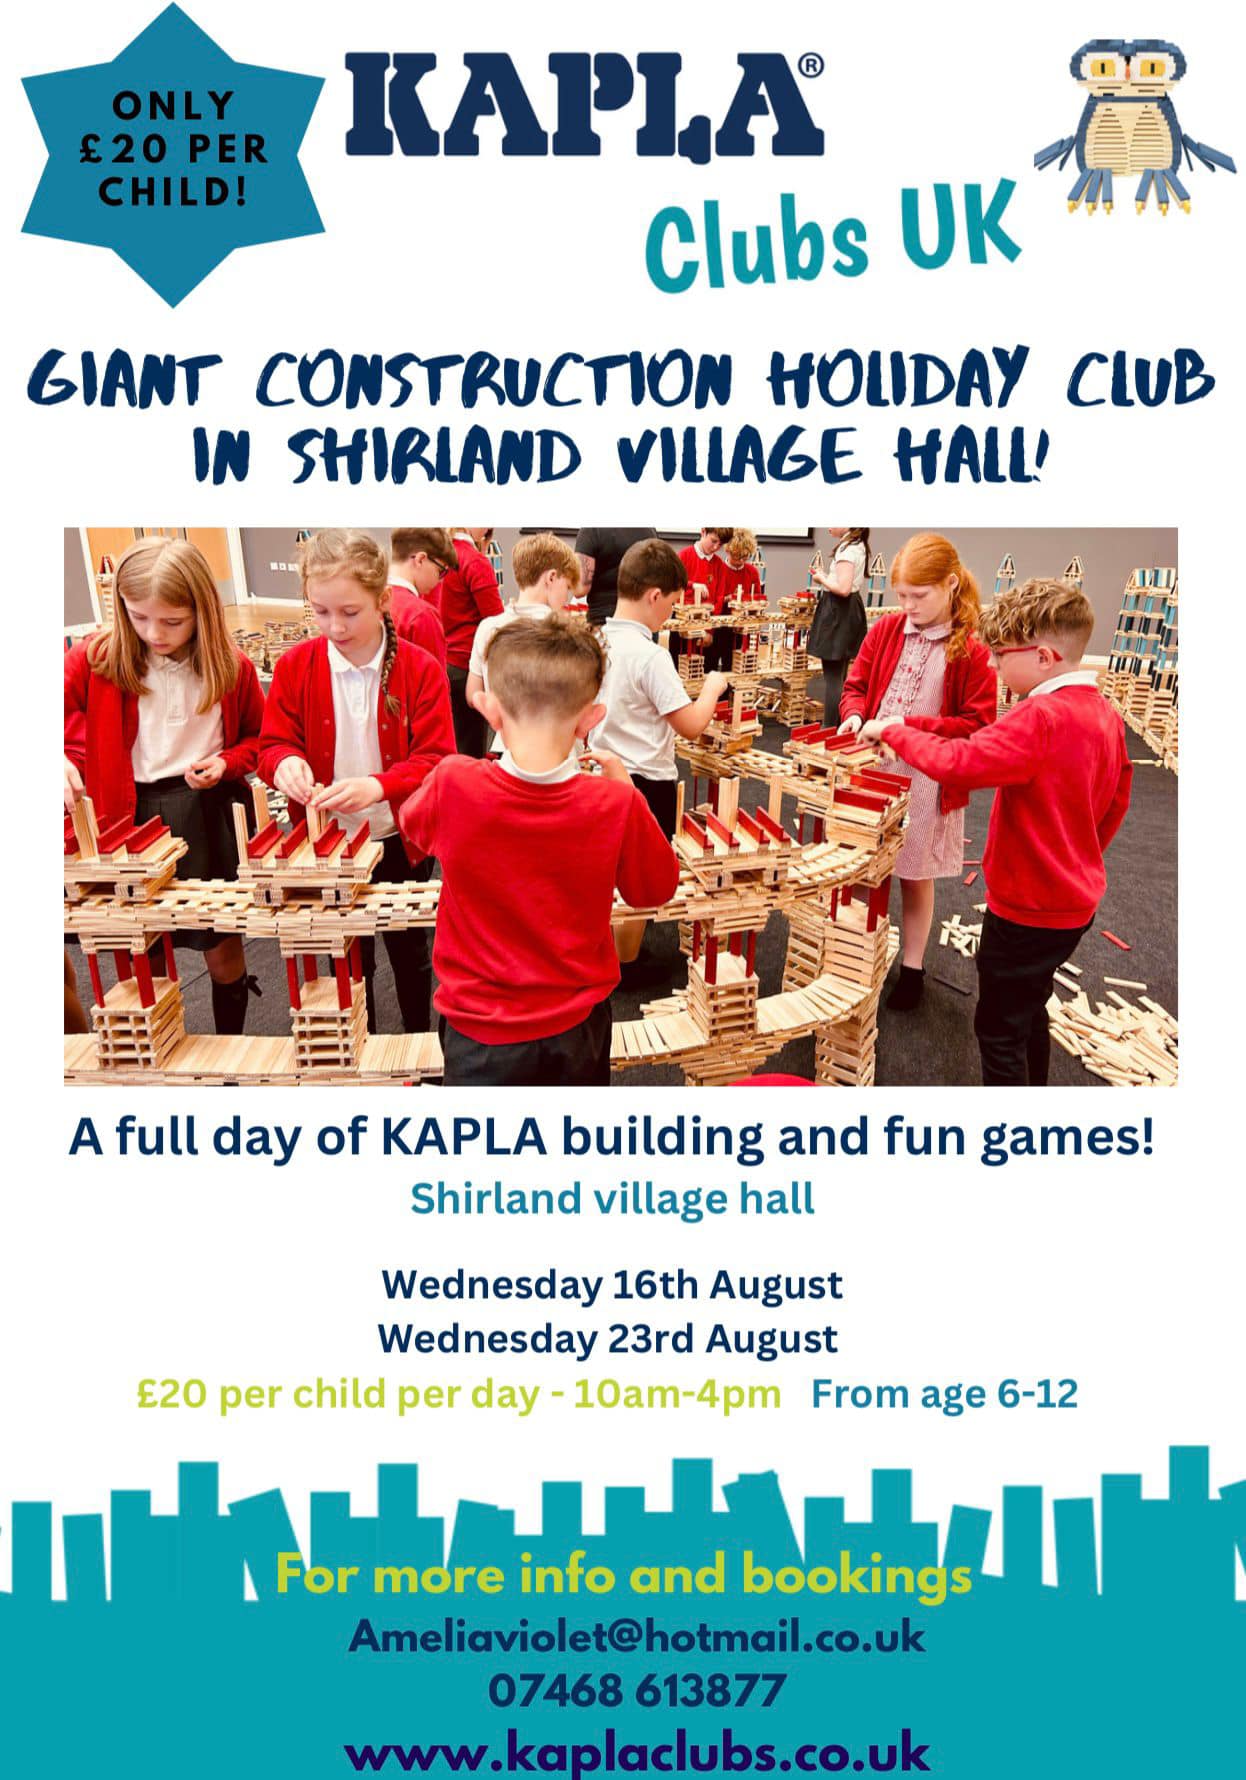 Kapla Clubs UK will host a construction themed holiday club in Shirland